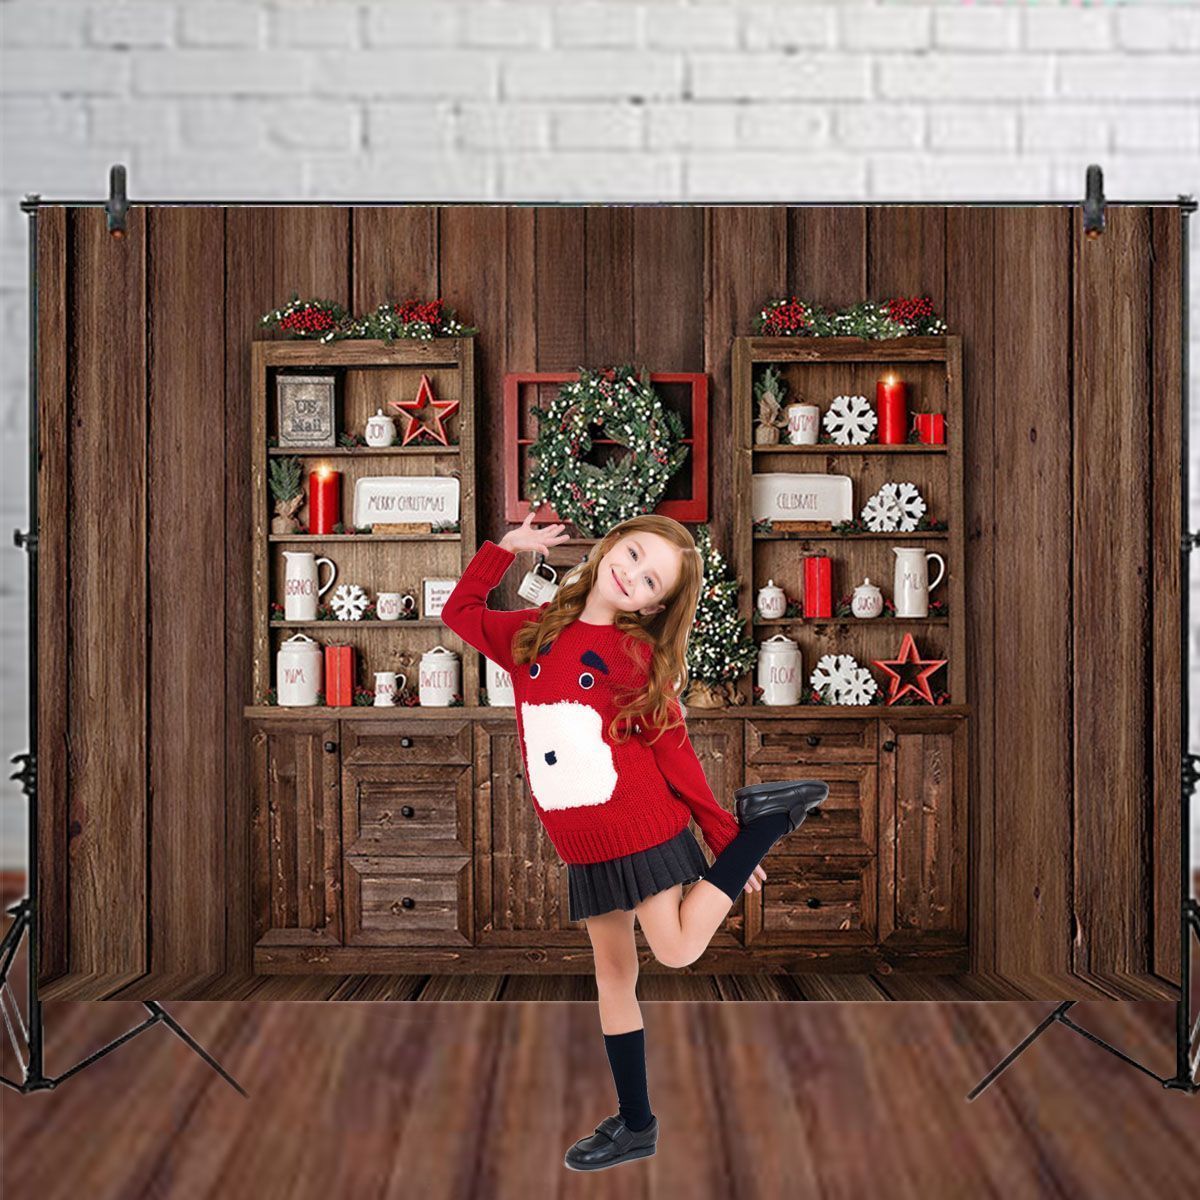 5x3FT-7x5FT-8x6FT-Wooden-Wall-Christmas-Cabinet-Photography-Backdrop-Background-Studio-Prop-1609474